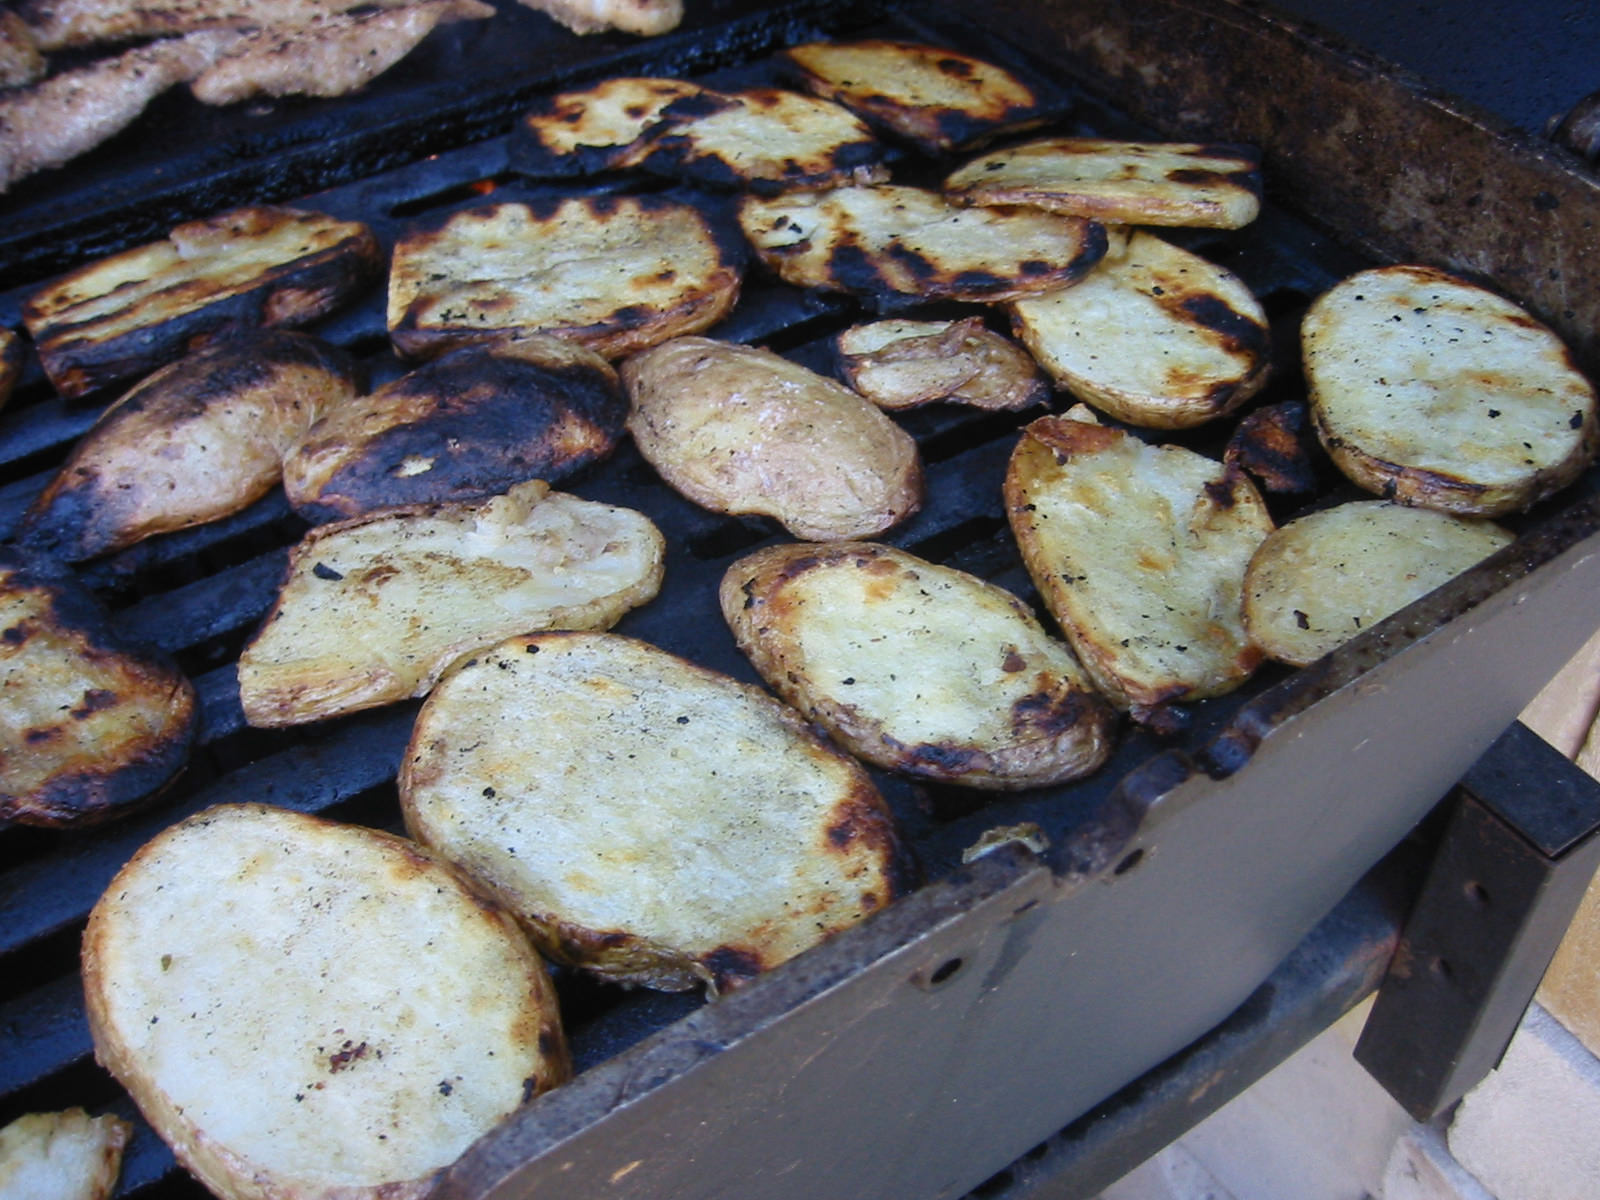 Potatoes on the barbie - almost done